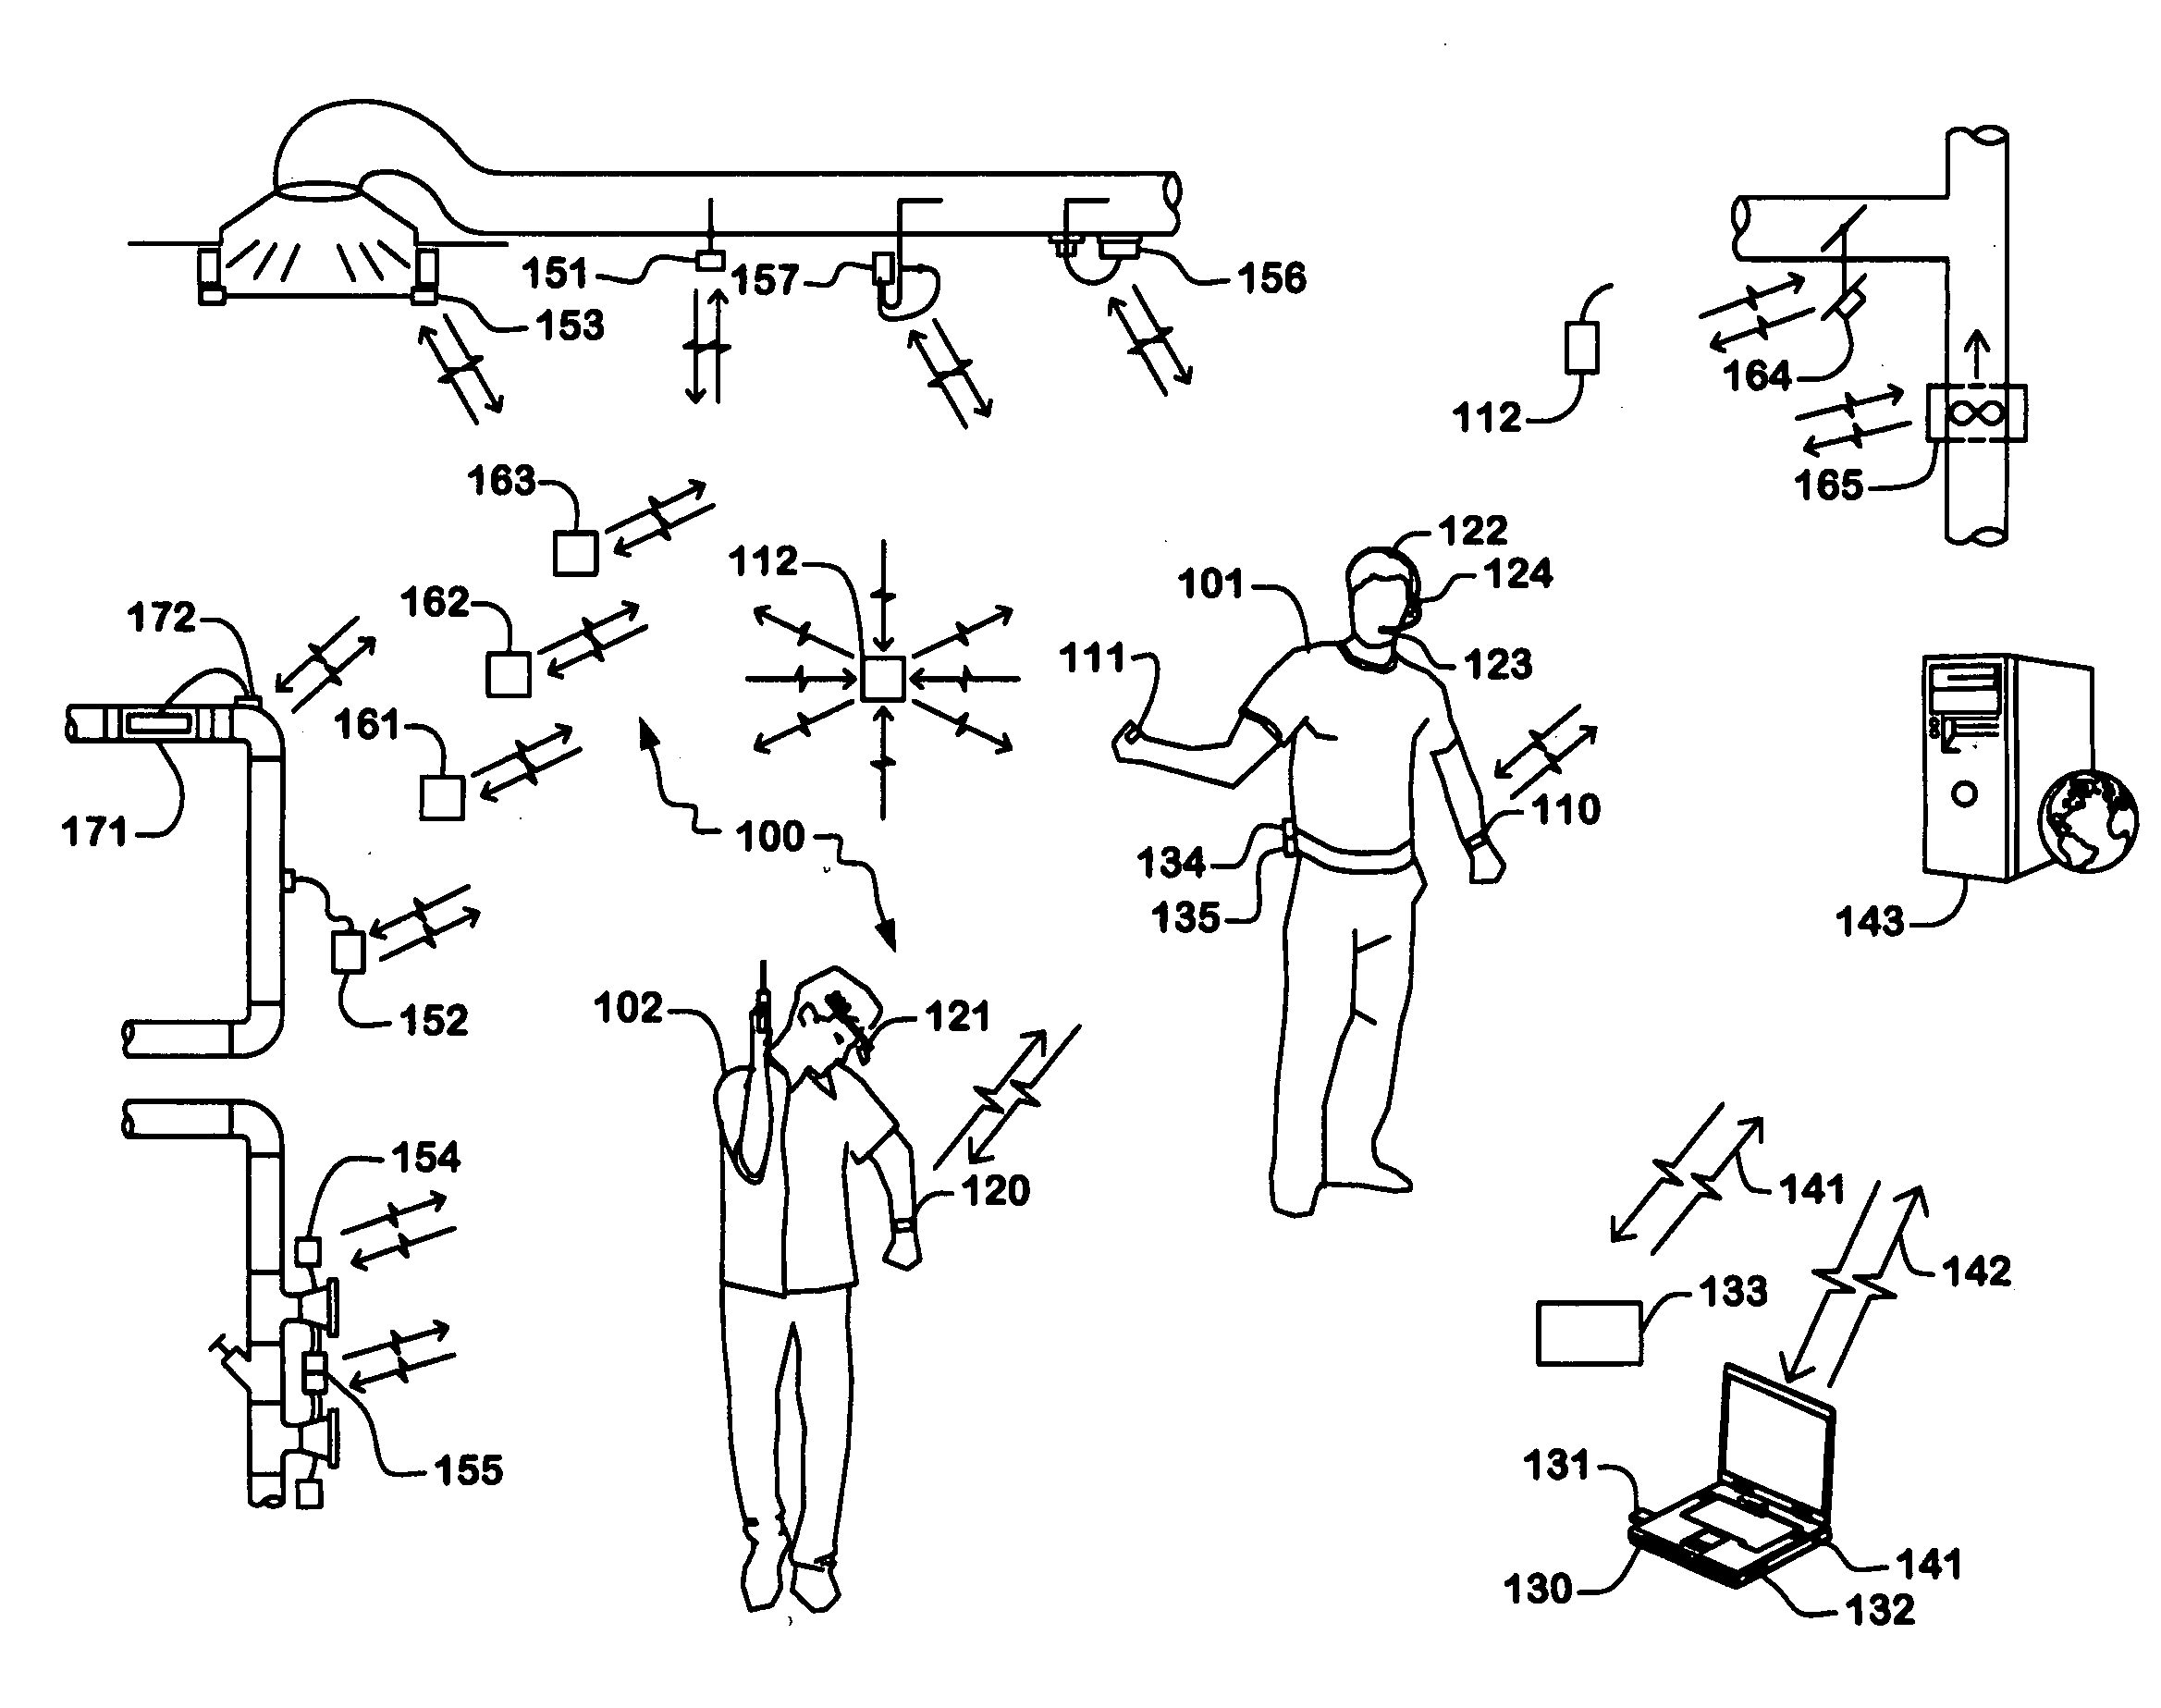 Wireless sensors system and method of using same